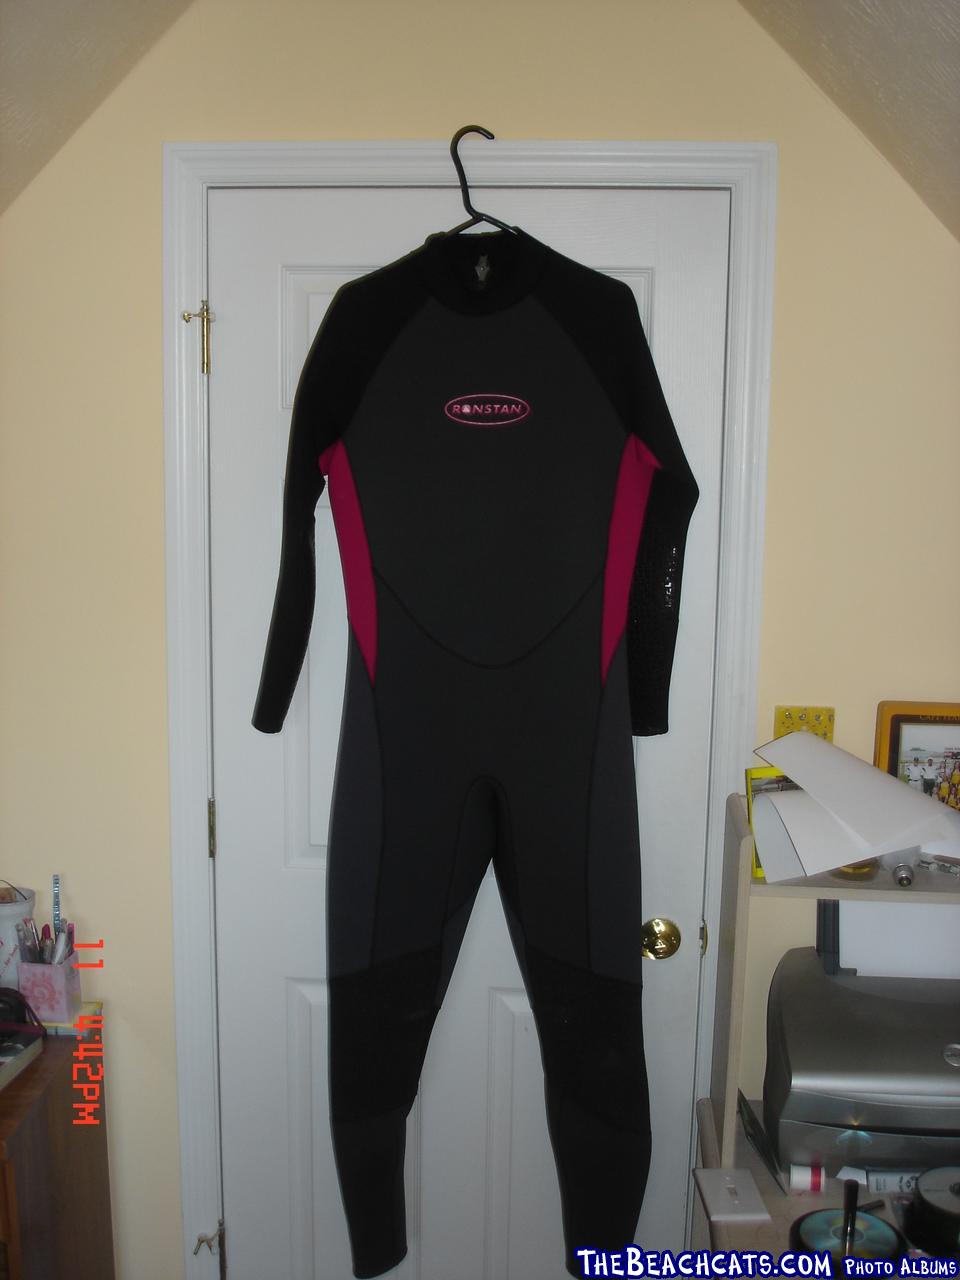 New Wetsuit/  6'5" is hard to accomodate